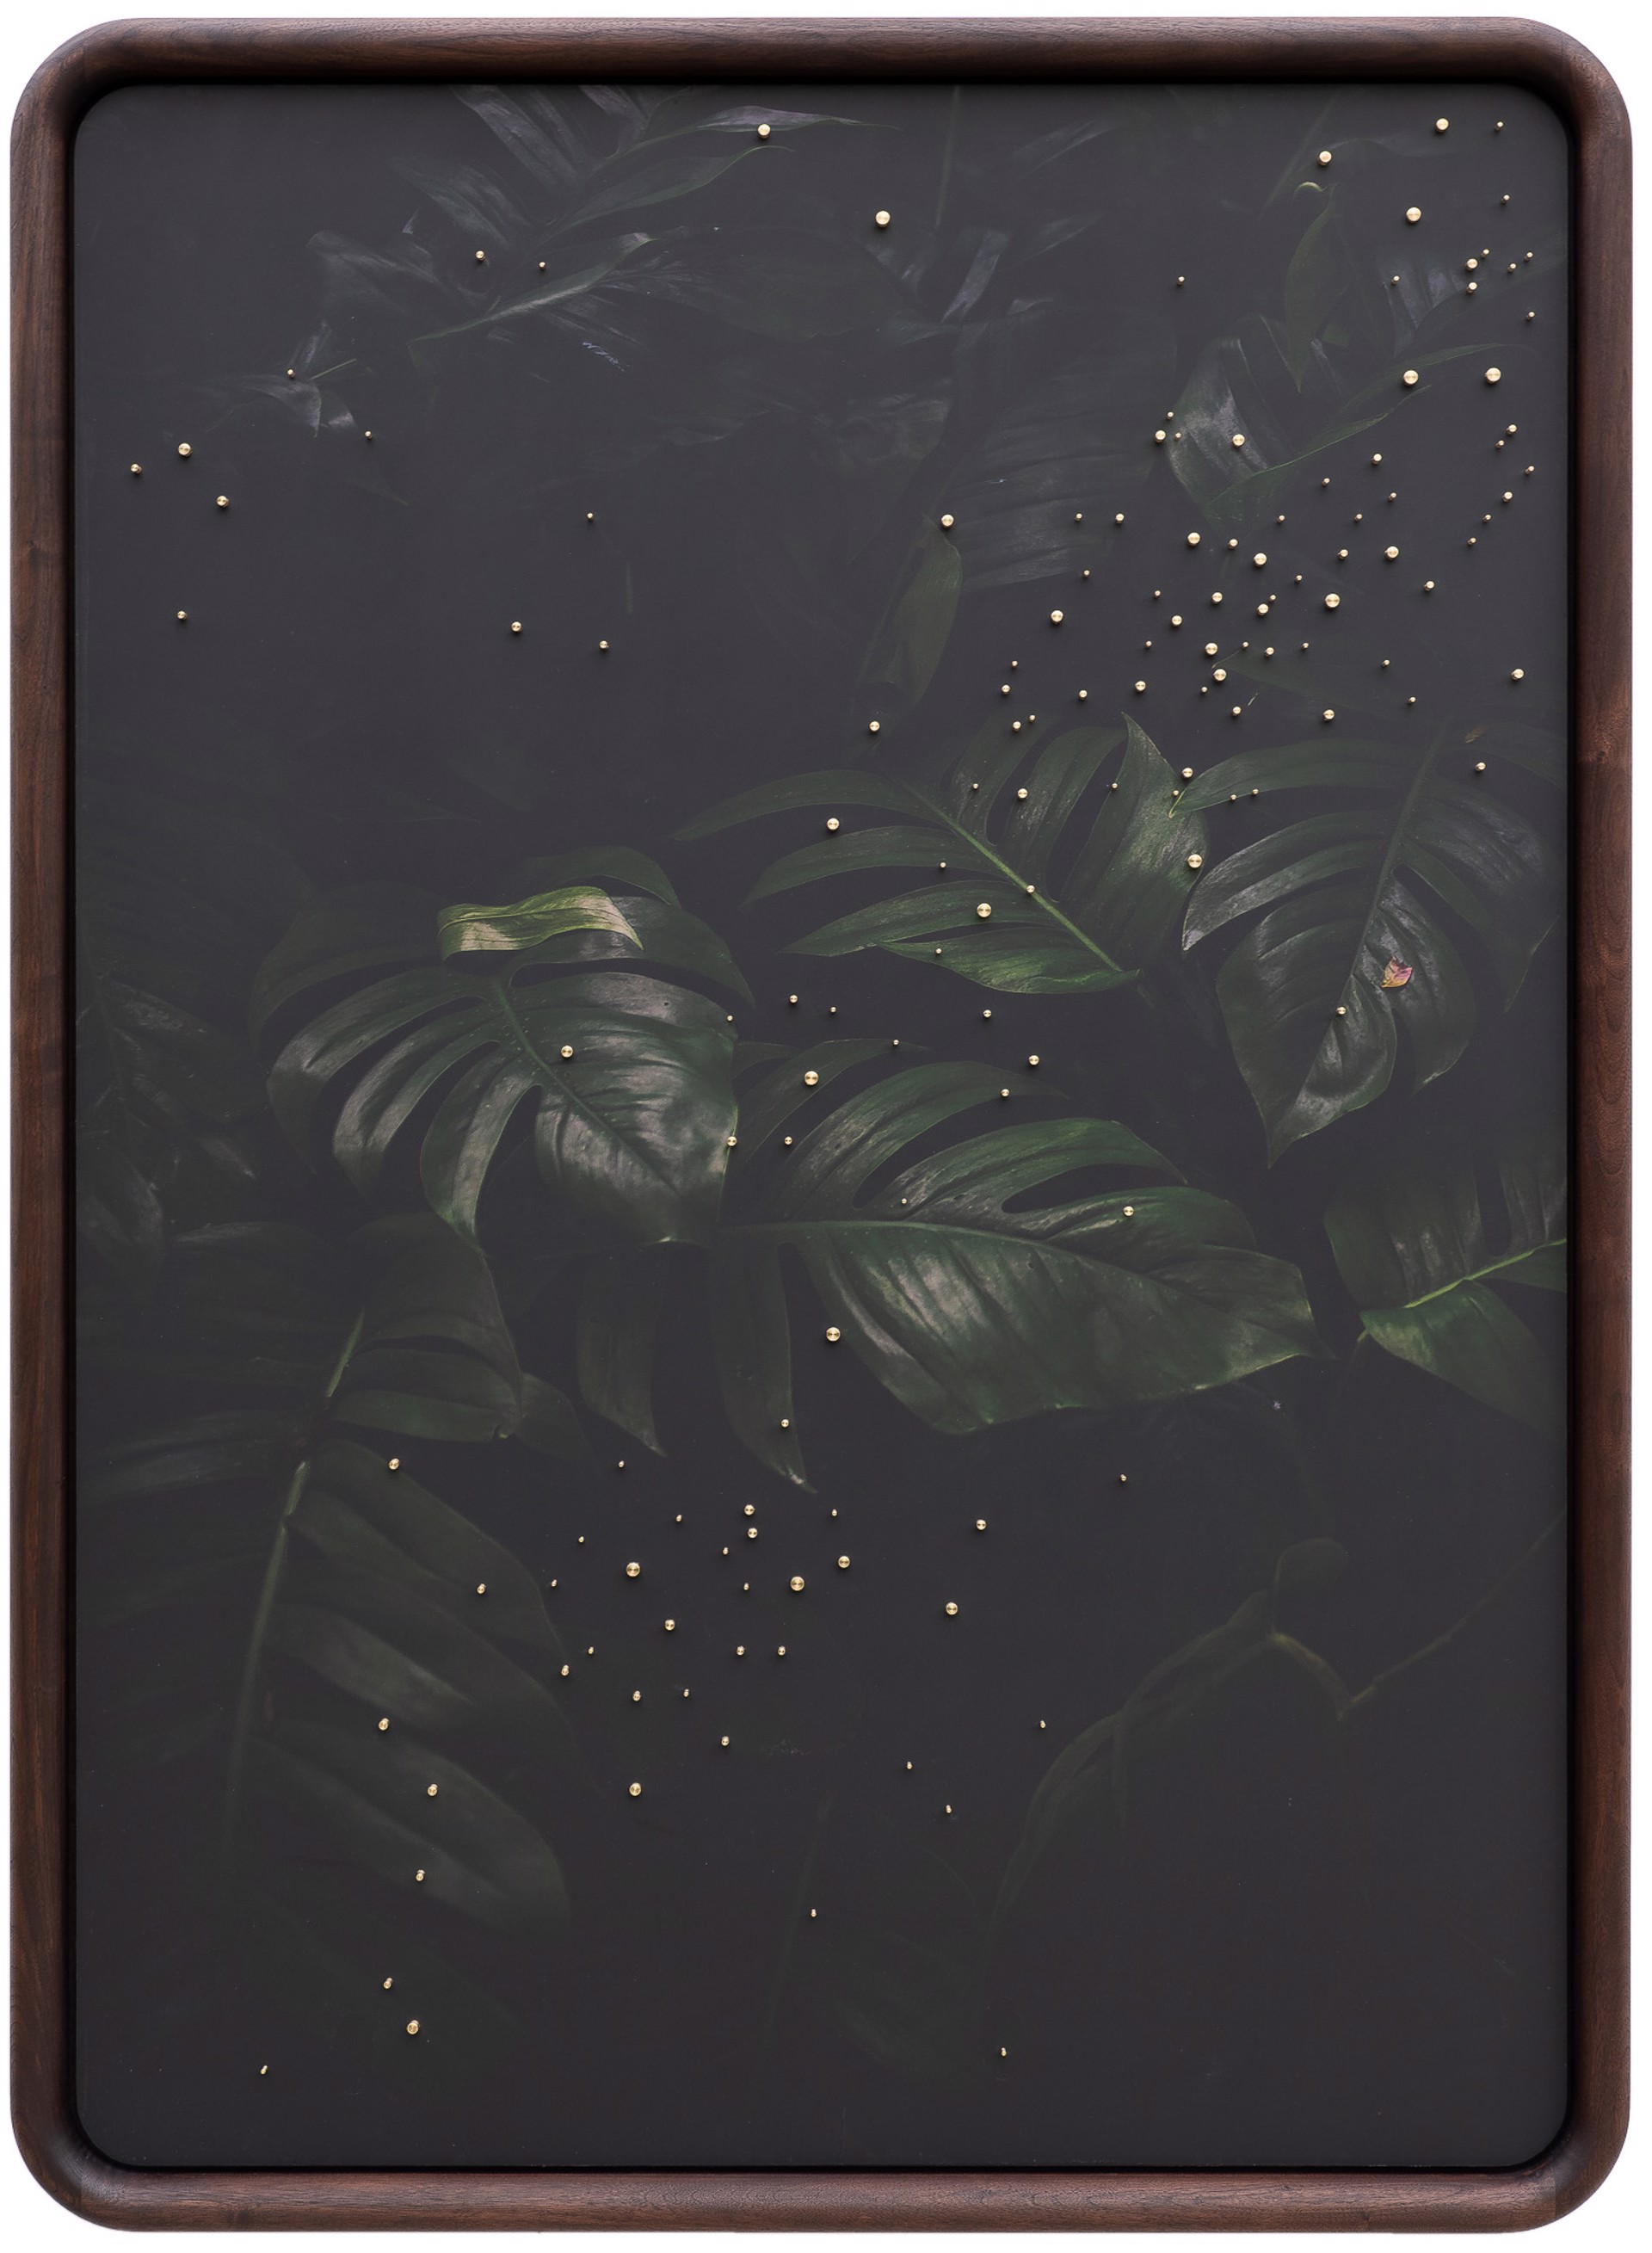 Out Of The Dark - Monstera by Patrick Lajoie